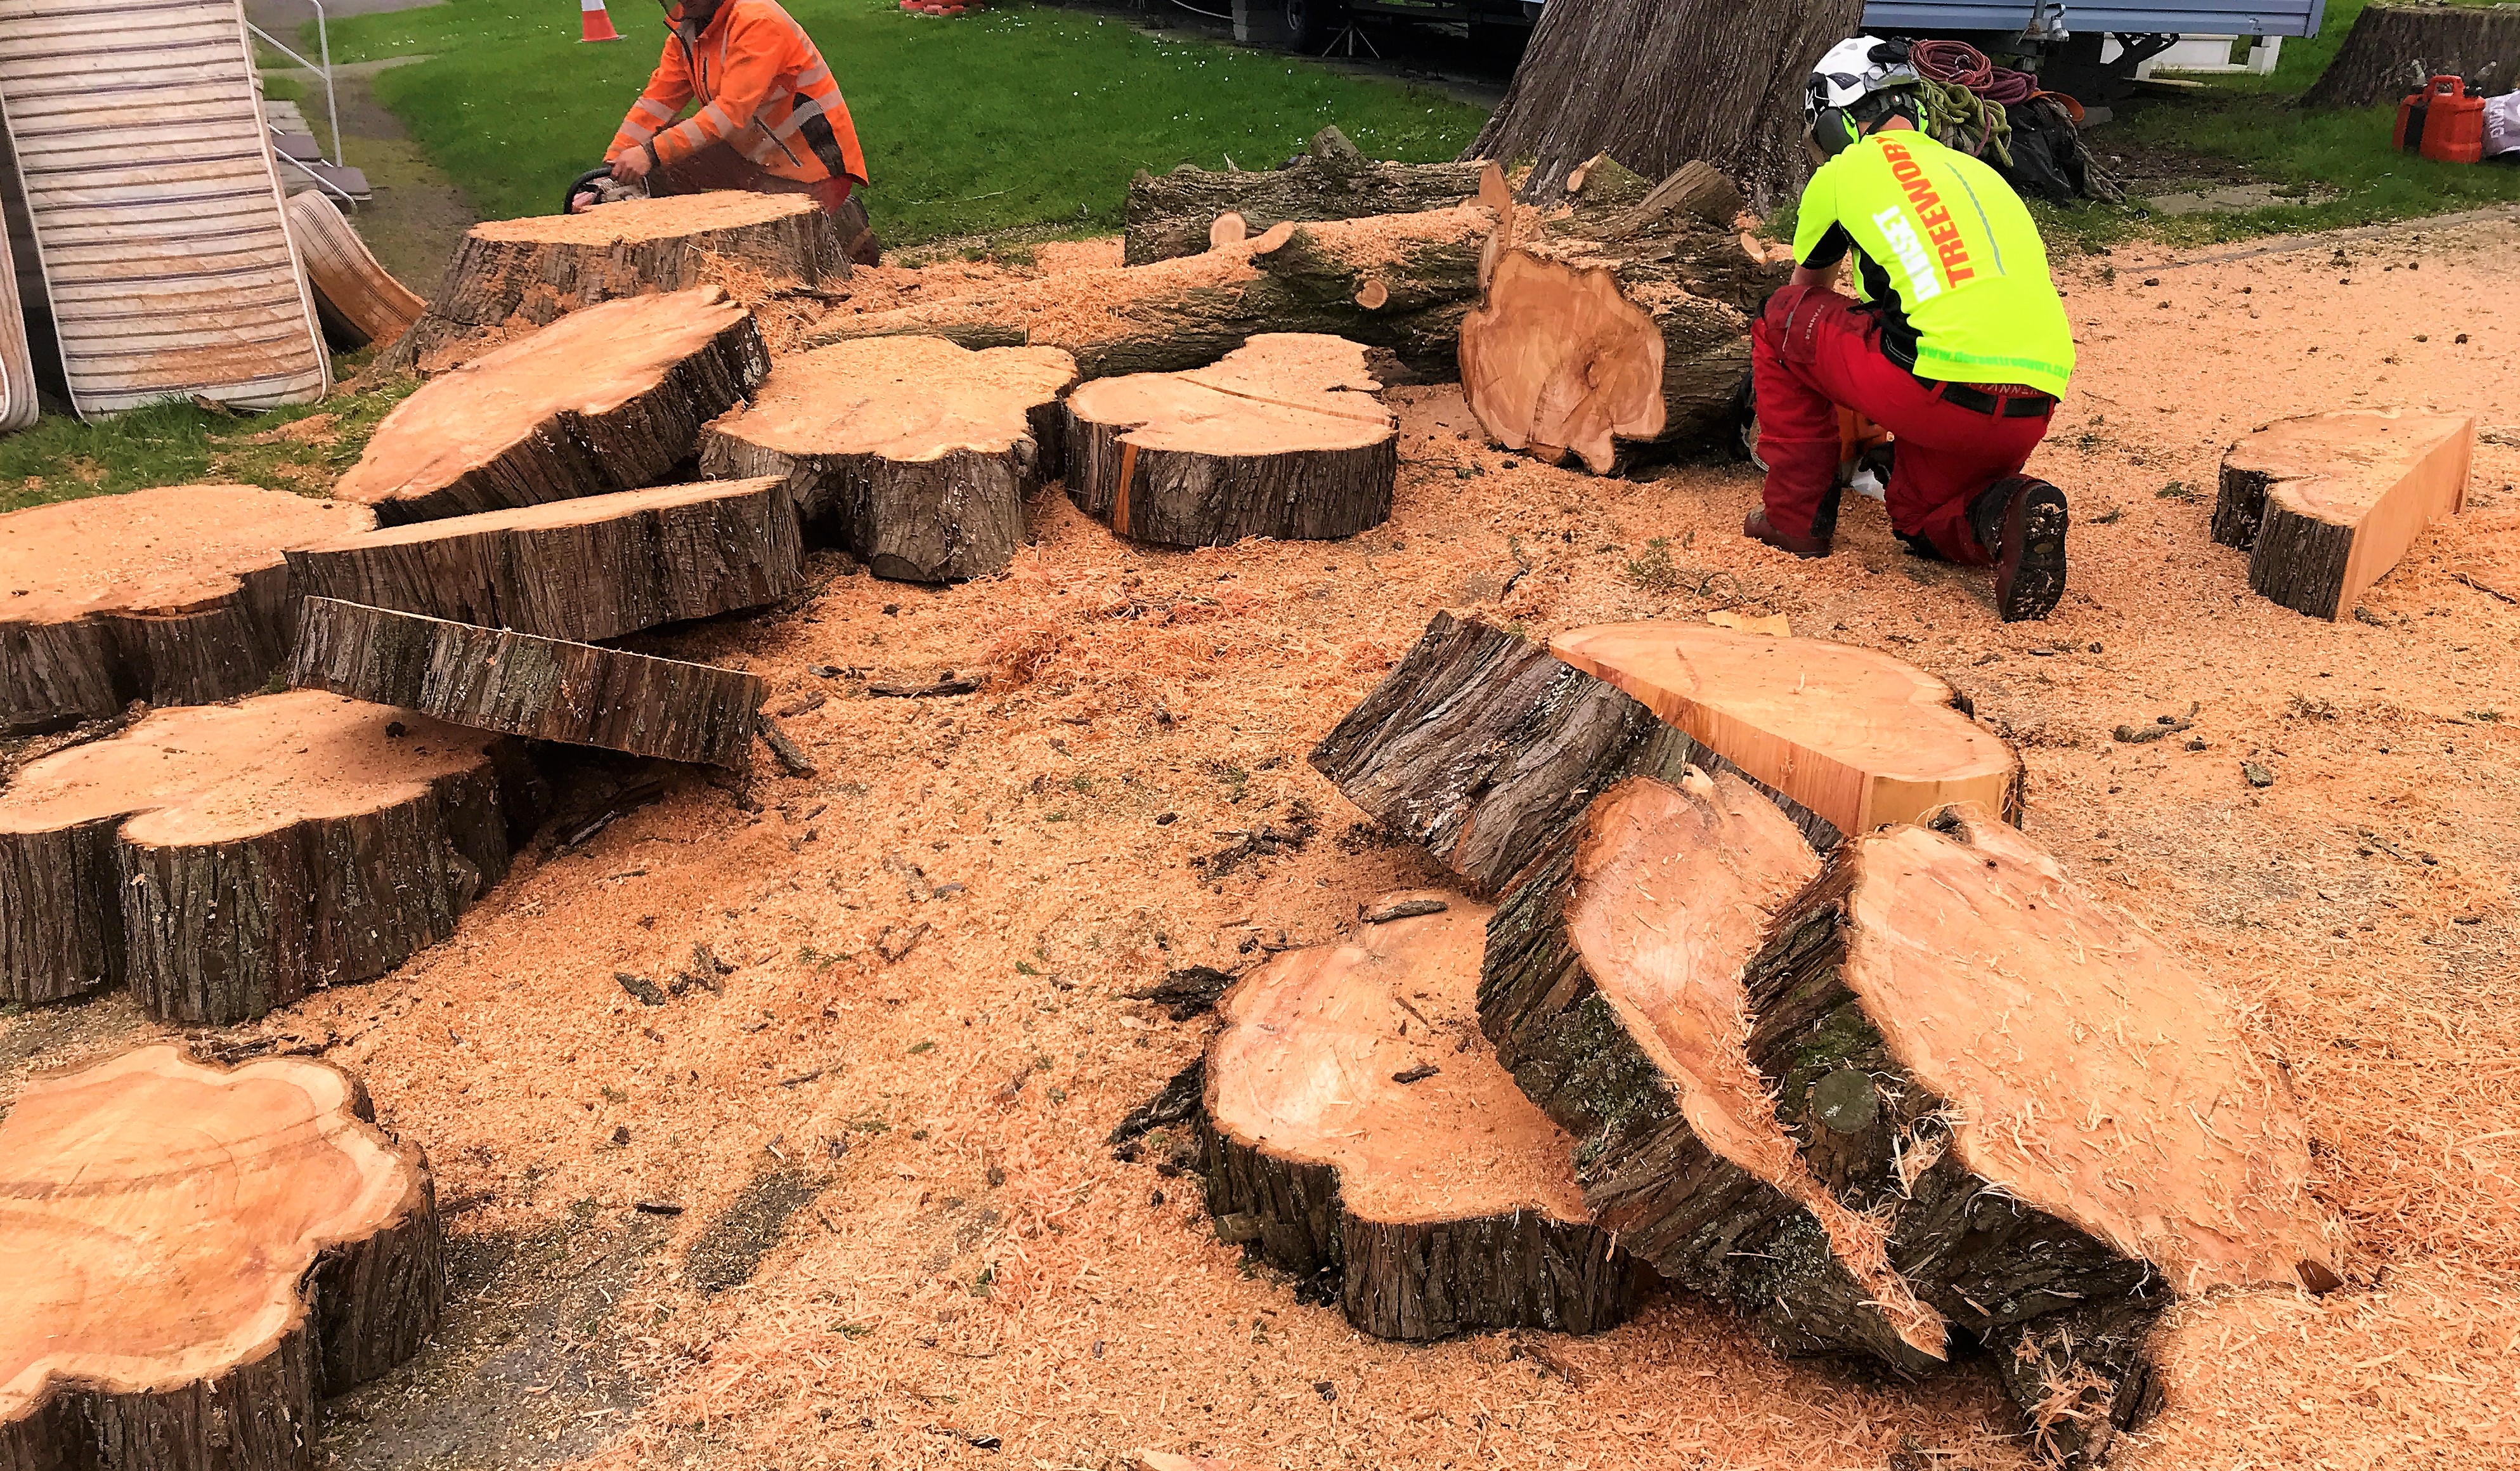 Weymouth tree surgeon - Commercial site clearance and maintenance in Weymouth, Dorchester, Portland, Dorset